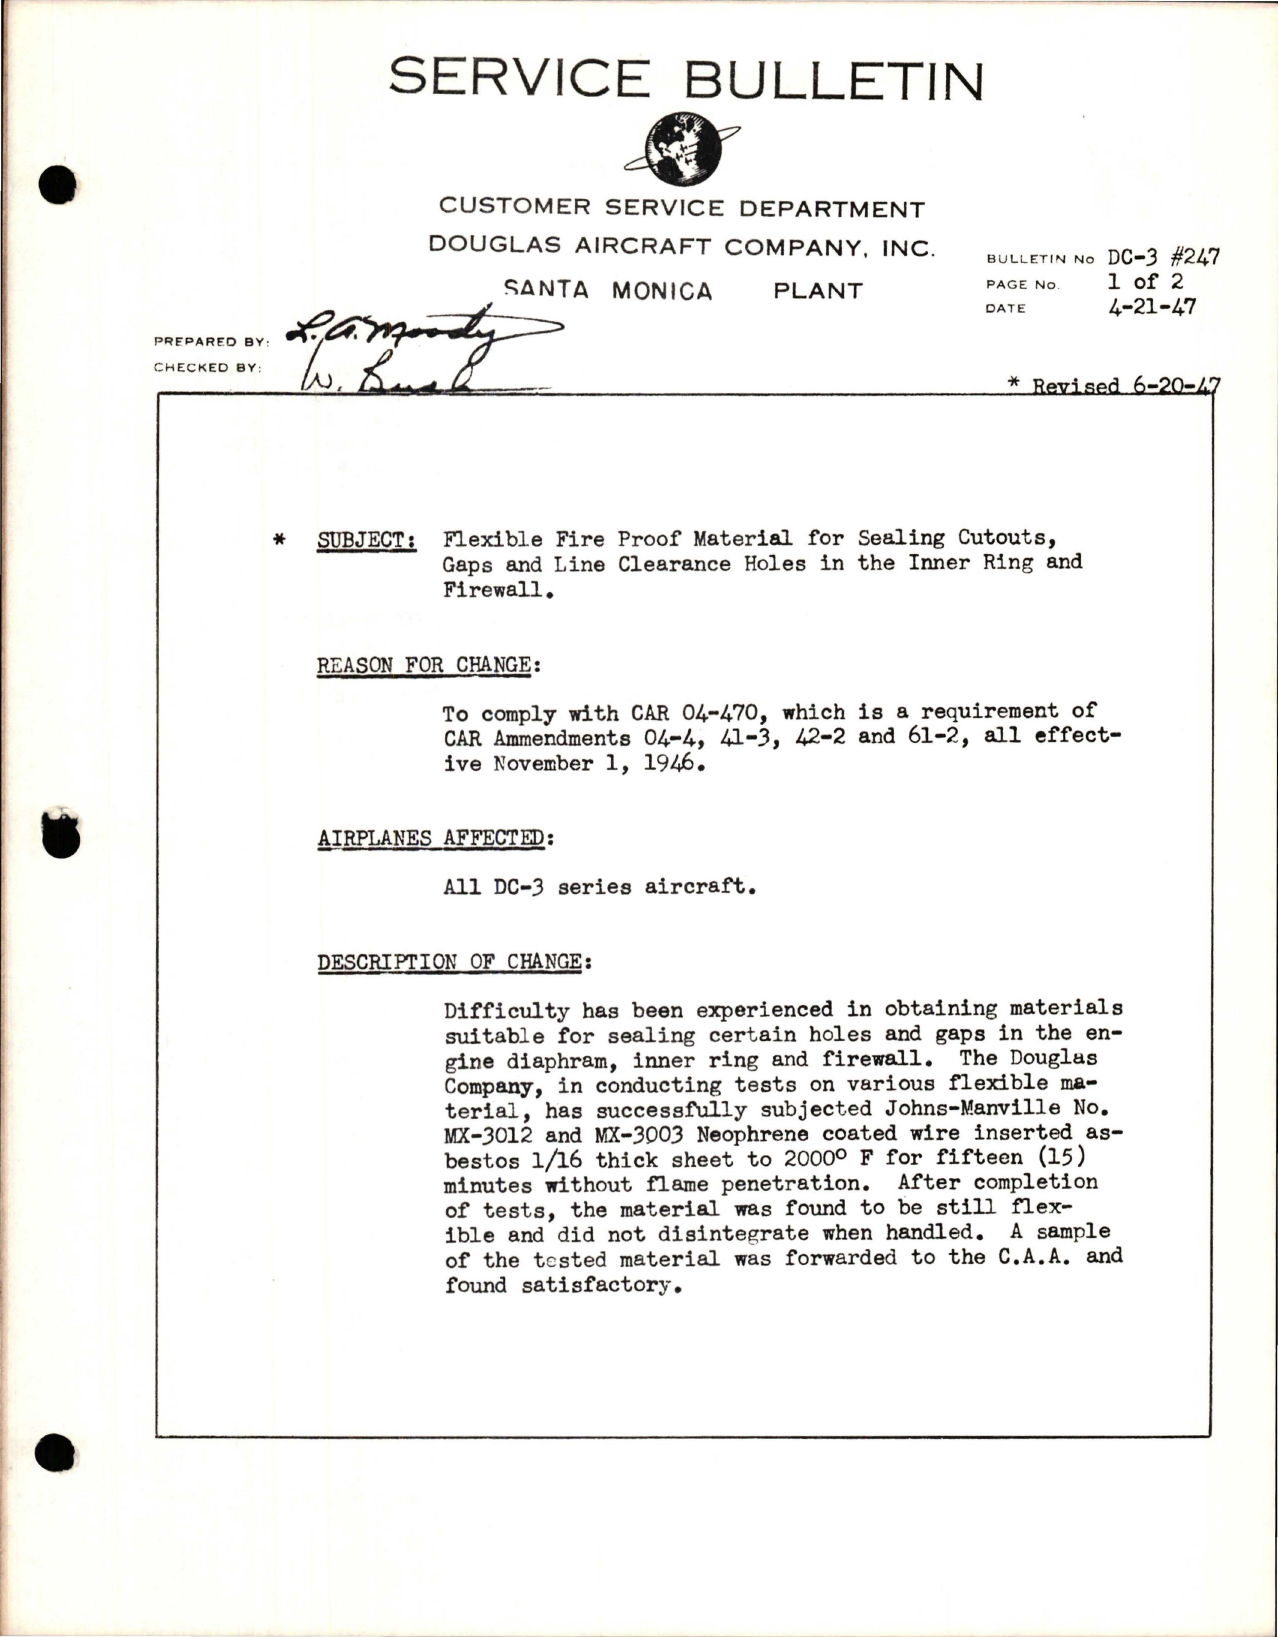 Sample page 1 from AirCorps Library document: Flexible Fire Proof Material for Sealing Cutouts, Gaps & Line Clearance Holes in the Inner Ring & Firewall